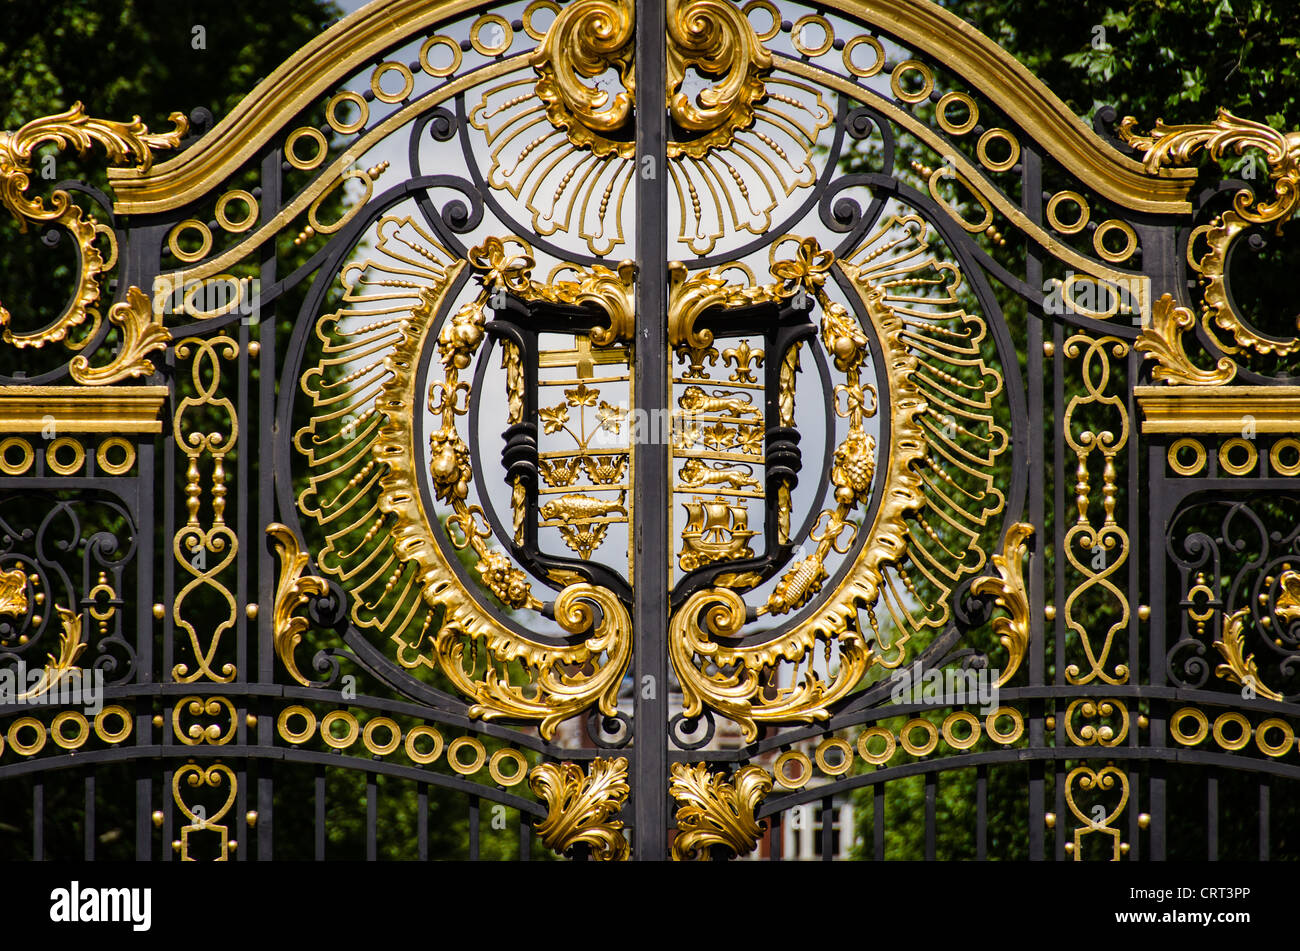 LONDON, United Kingdom — The Green Park gates, a set of ornate wrought-iron gates, mark the entrance to Buckingham Palace from Green Park. These gates, adorned with intricate designs, are not only a security feature but also a symbol of the grandeur of the British Royal Family's primary residence. Stock Photo